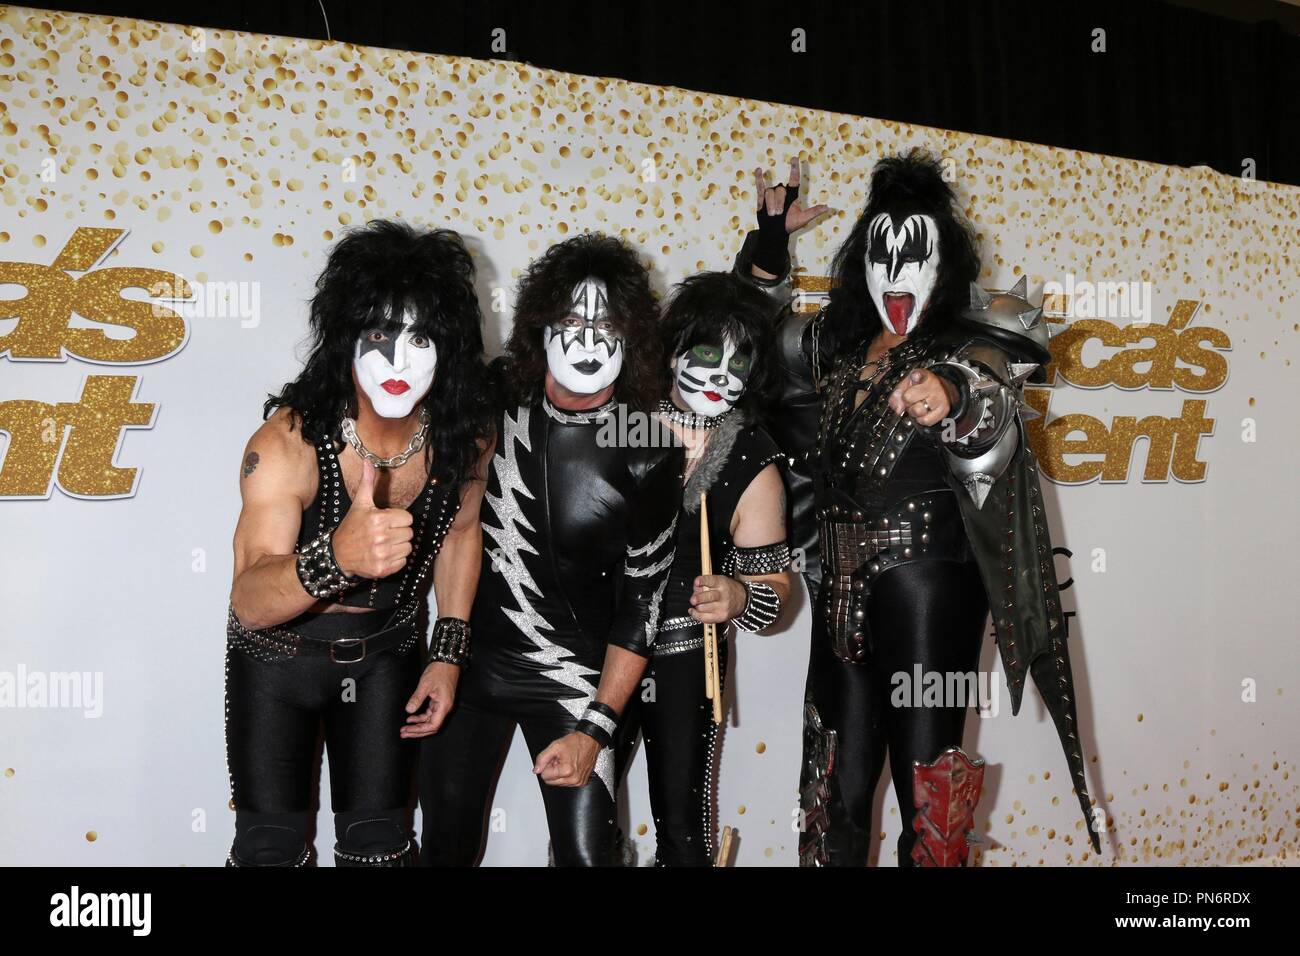 Los Angeles, CA, USA. 19th Sep, 2018. Paul Stanley, Tommy Thayer, Eric Singer, Gene Simmons, KISS at arrivals for AMERICA'S GOT TALENT (AGT) Season 13 Finale Live Show Red Carpet, Dolby Theatre, Los Angeles, CA September 19, 2018. Credit: Priscilla Grant/Everett Collection/Alamy Live News Stock Photo